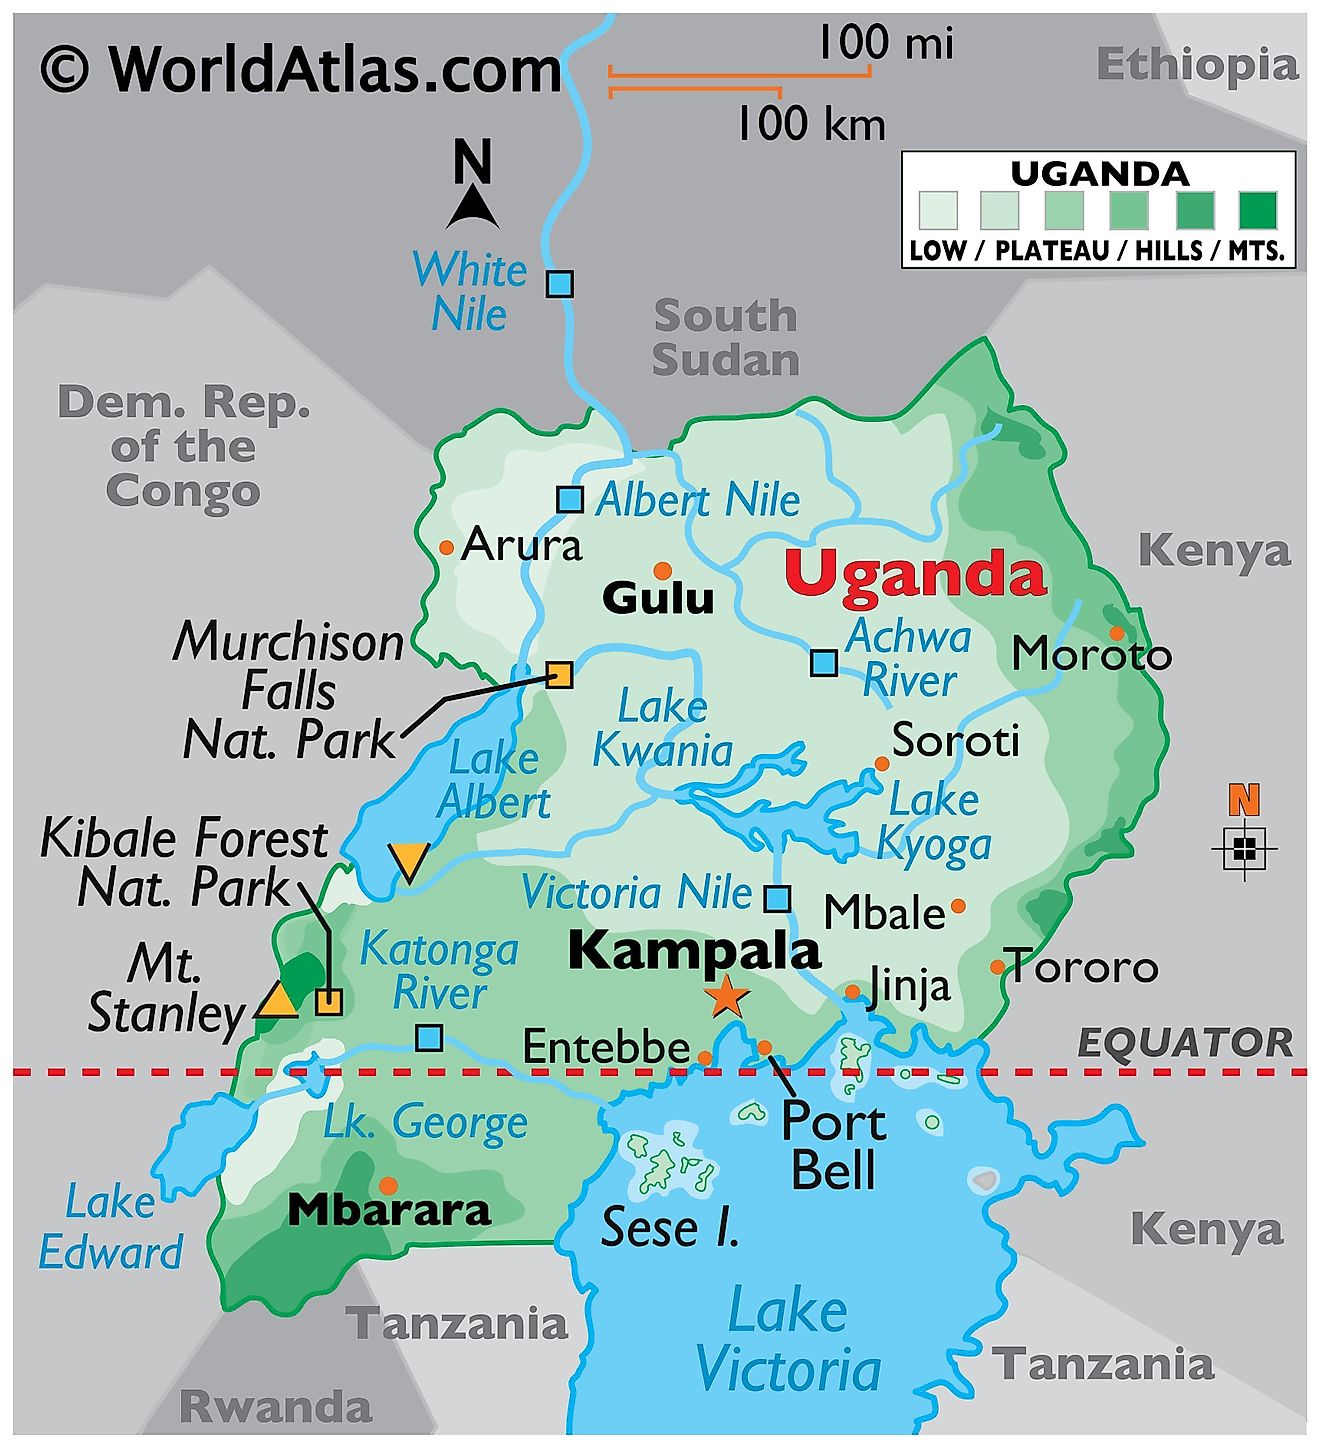 Physical Map of Uganda showing the state boundaries and major physical features like mountain ranges, rivers, plateaus, lakes, national parks, and relative location of major cities.